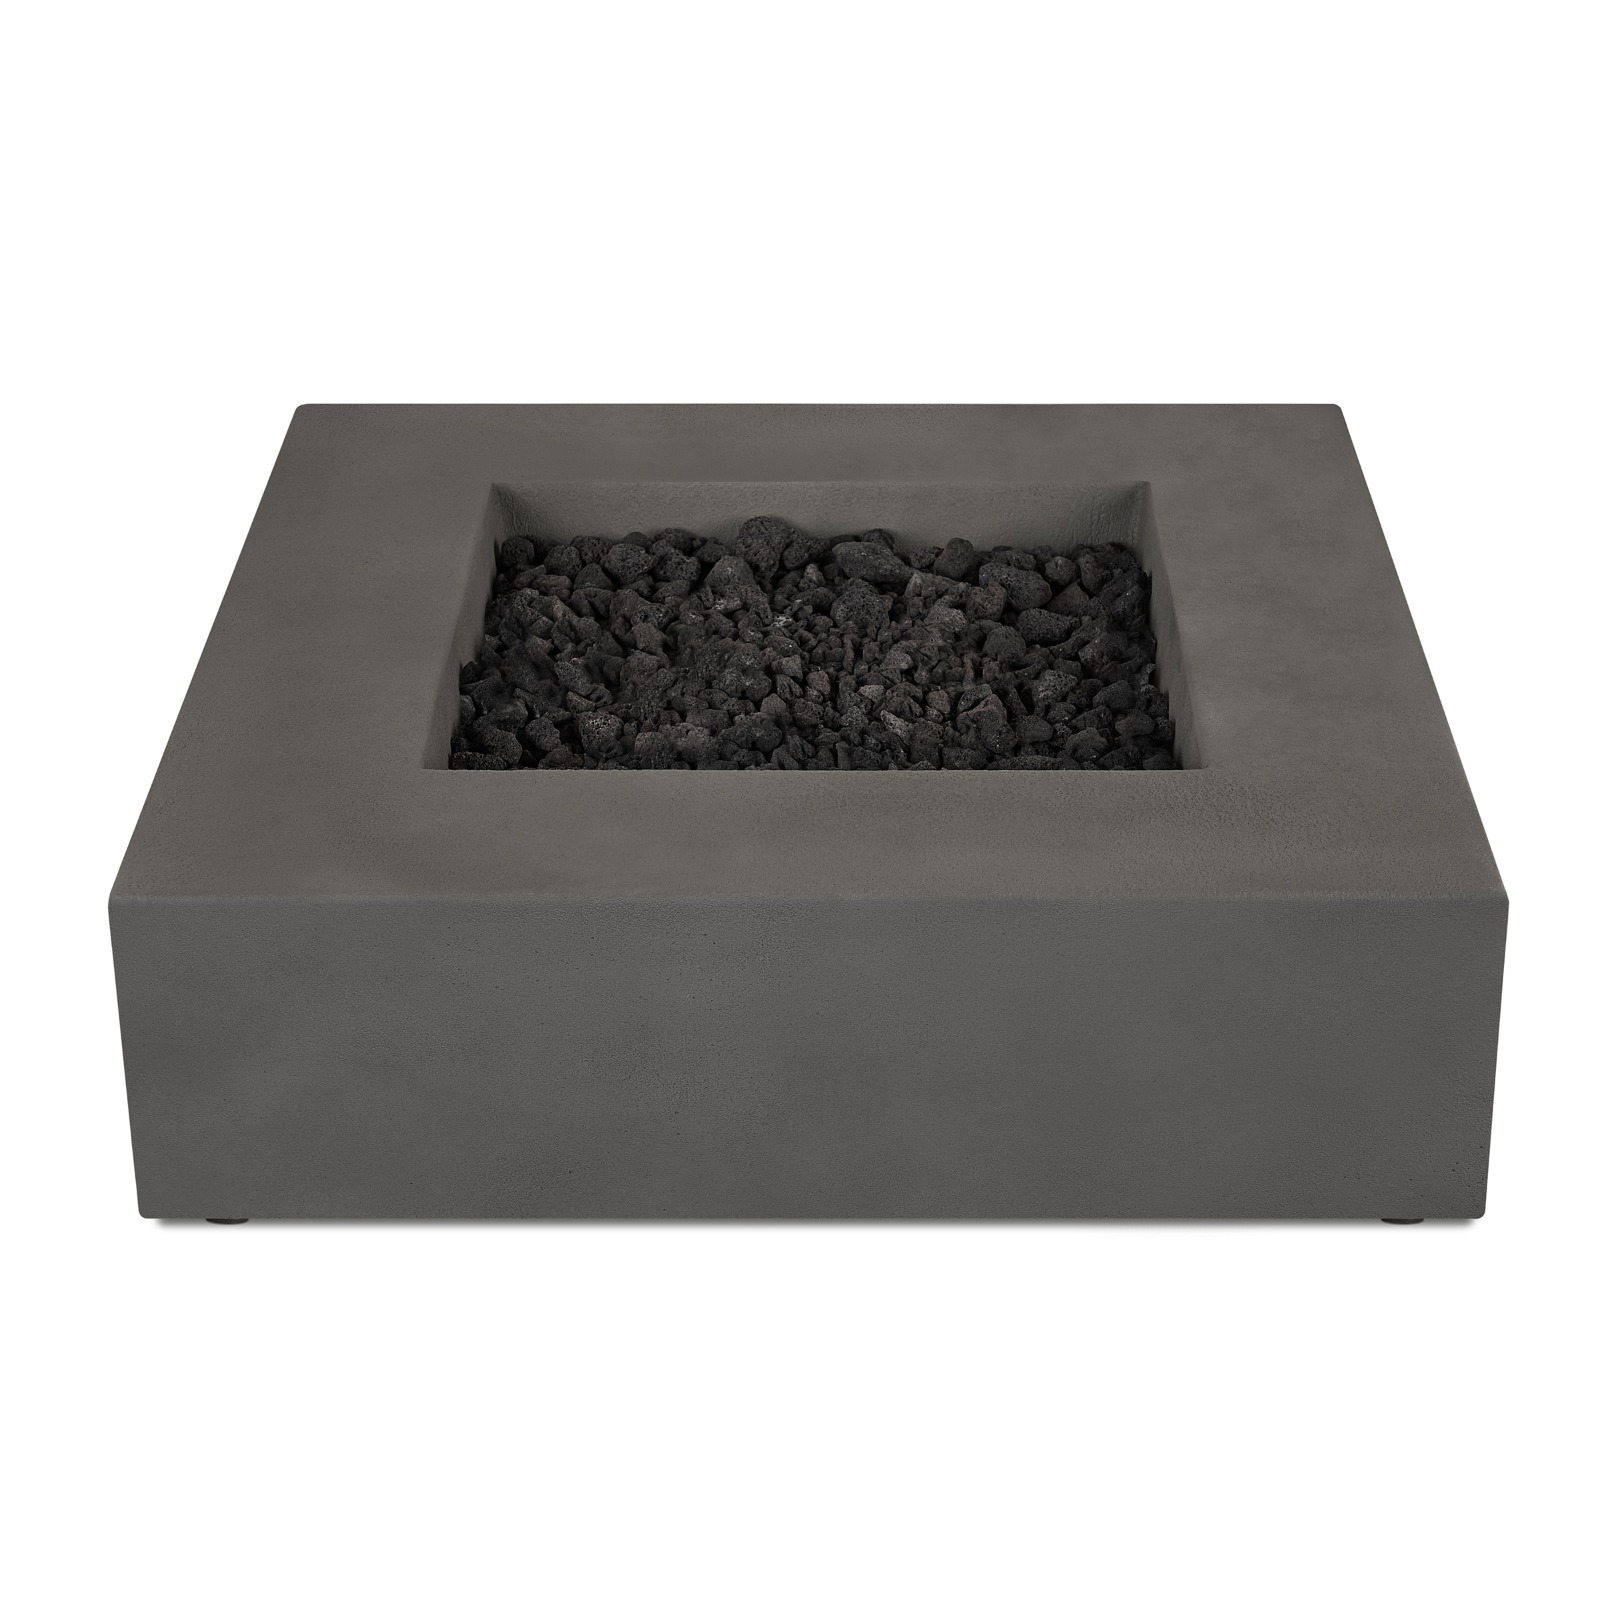 Estes Low Square GFRC Outdoor Natural Gas or Propane Fire Pit Fireplace Fire Table for Backyard or Patio